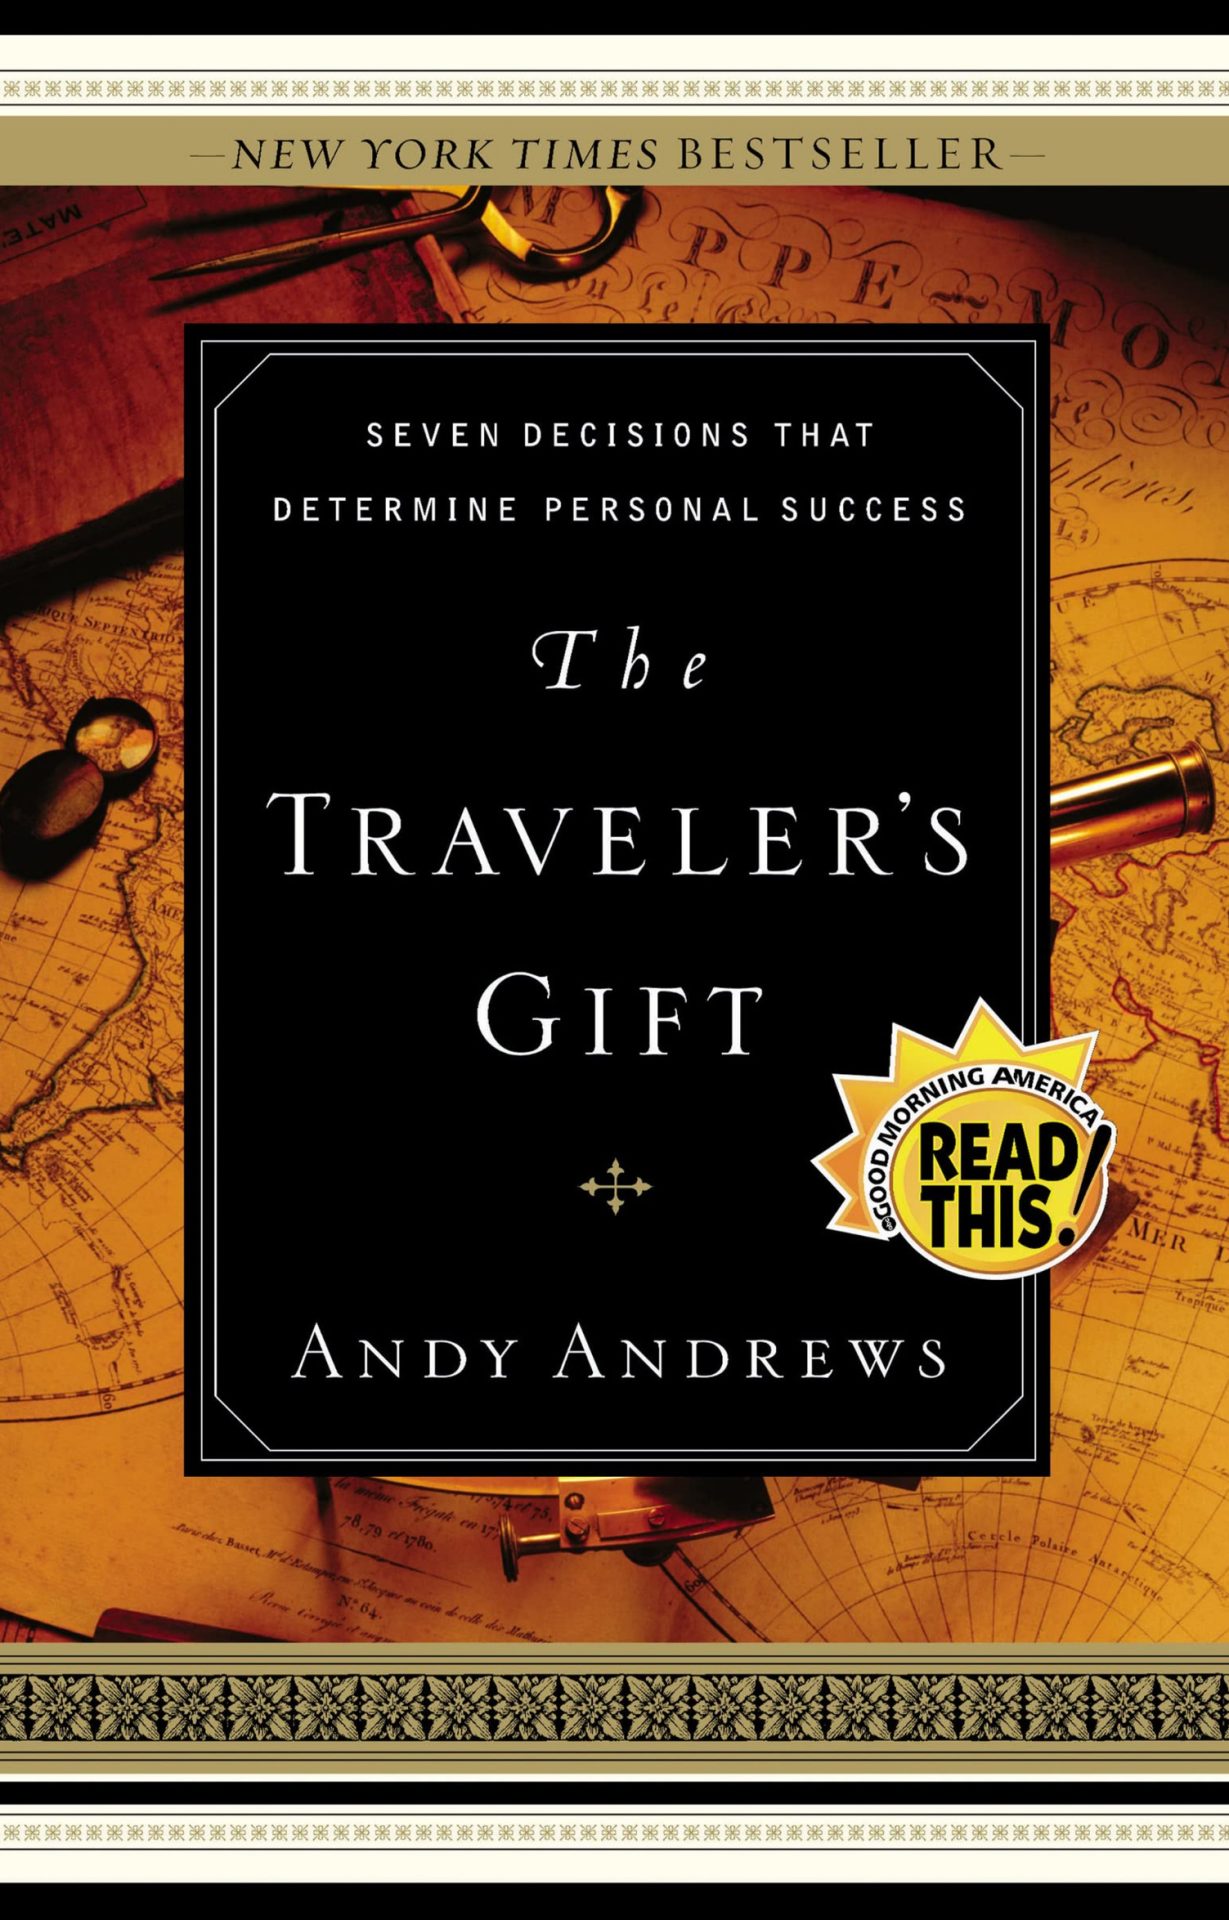 Cover of The Traveler: The Seven Decisions That Determine Individual Success - Andy Andrews